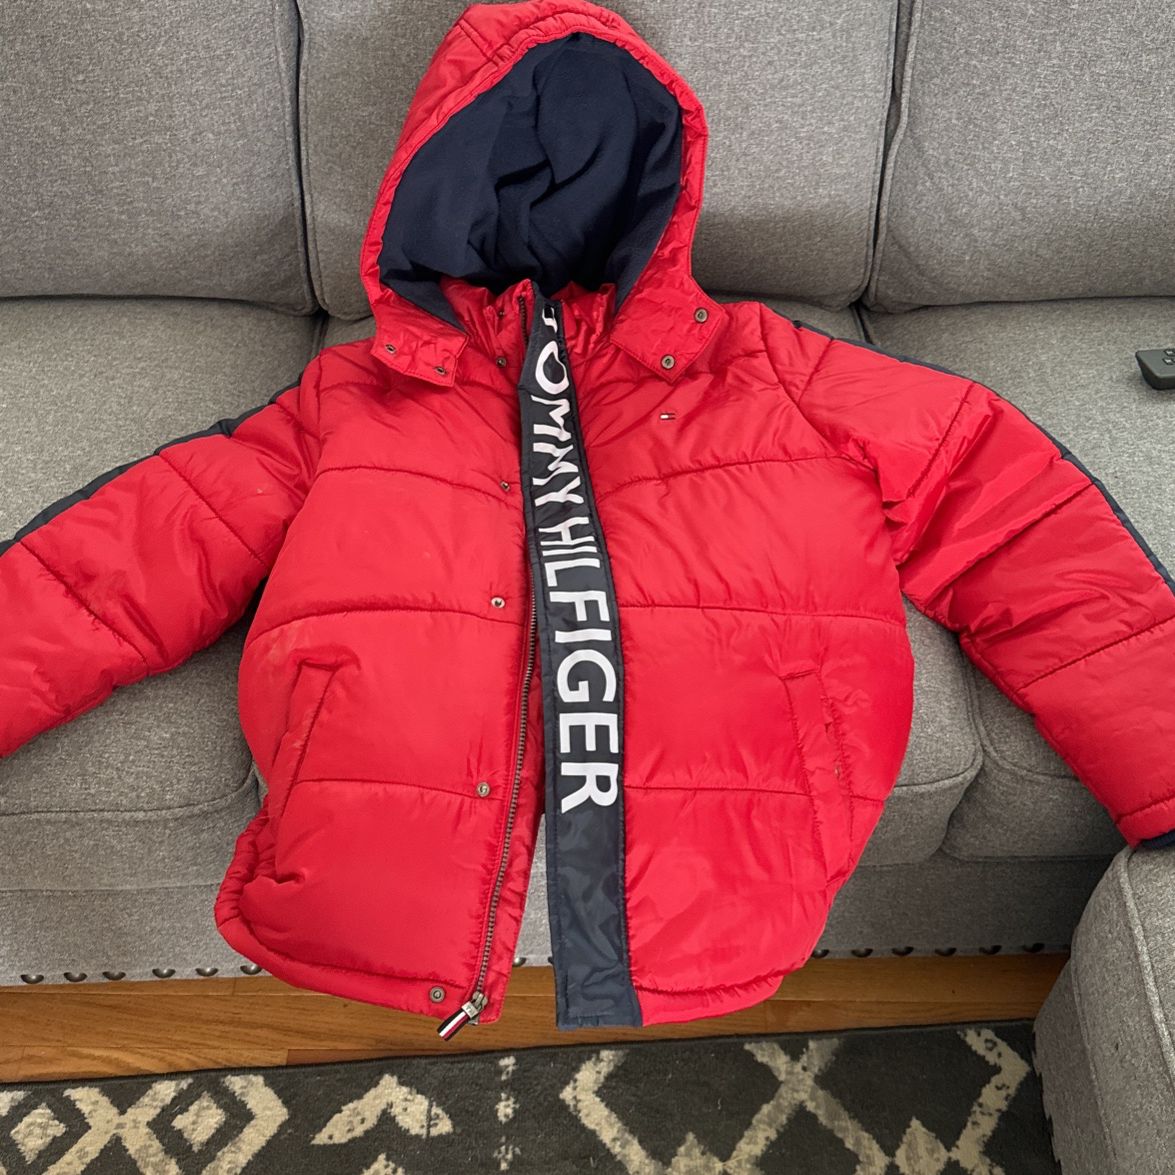 Youth Size XL Tommy Hilfiger Winter Coat $30